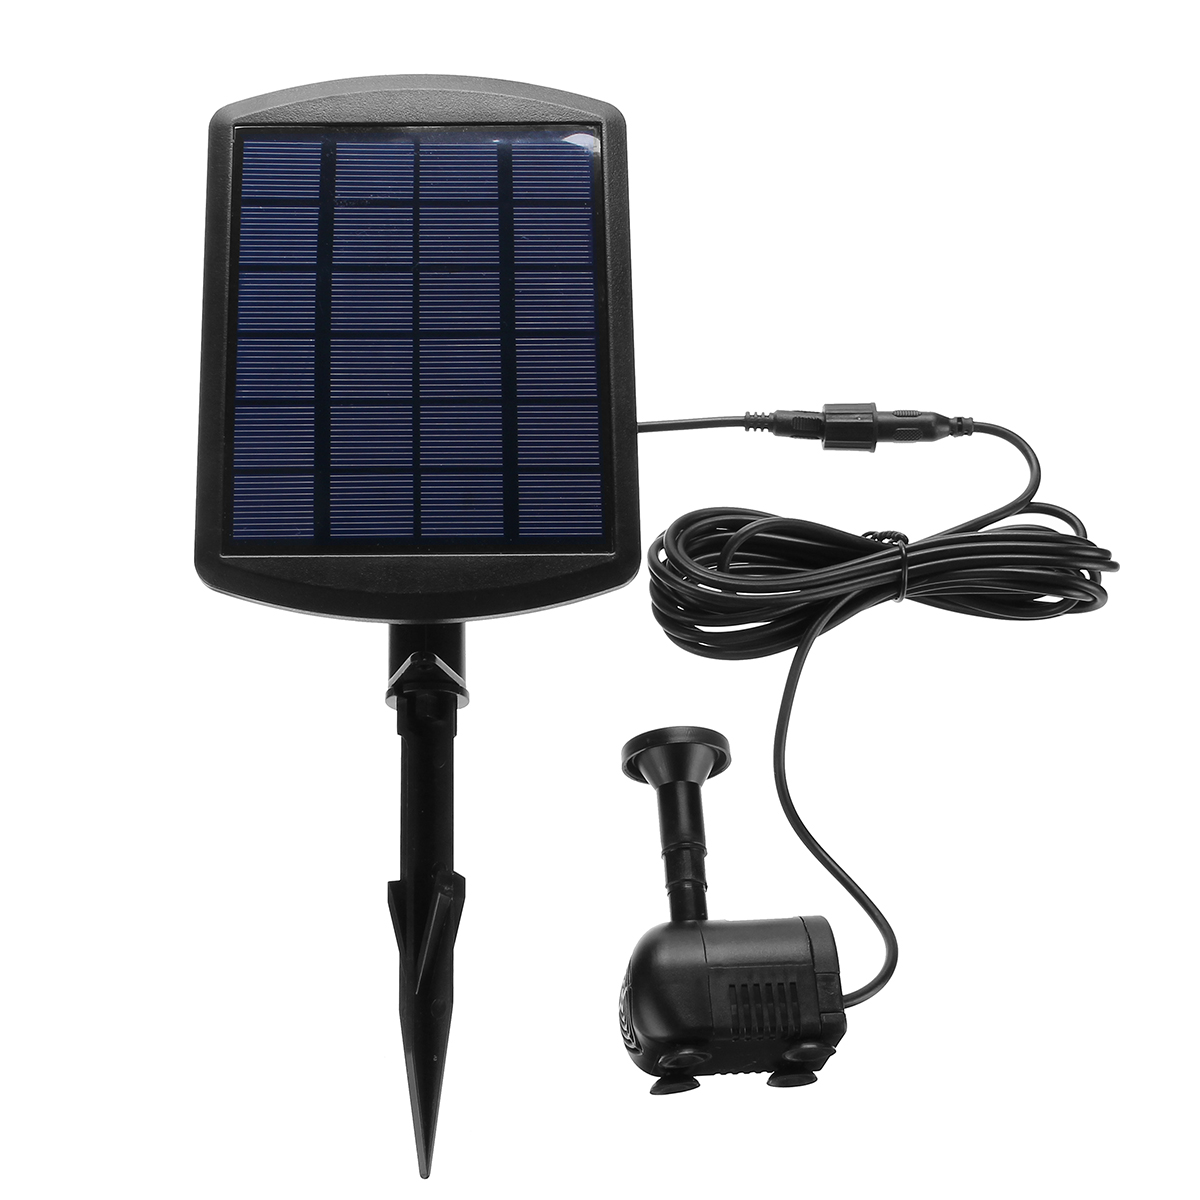 6V-18W-Solar-Panel-Powered-Water-Fountain-Pump-For-Pool-Pond-Garden-Outdoor-Submersible-1473018-7